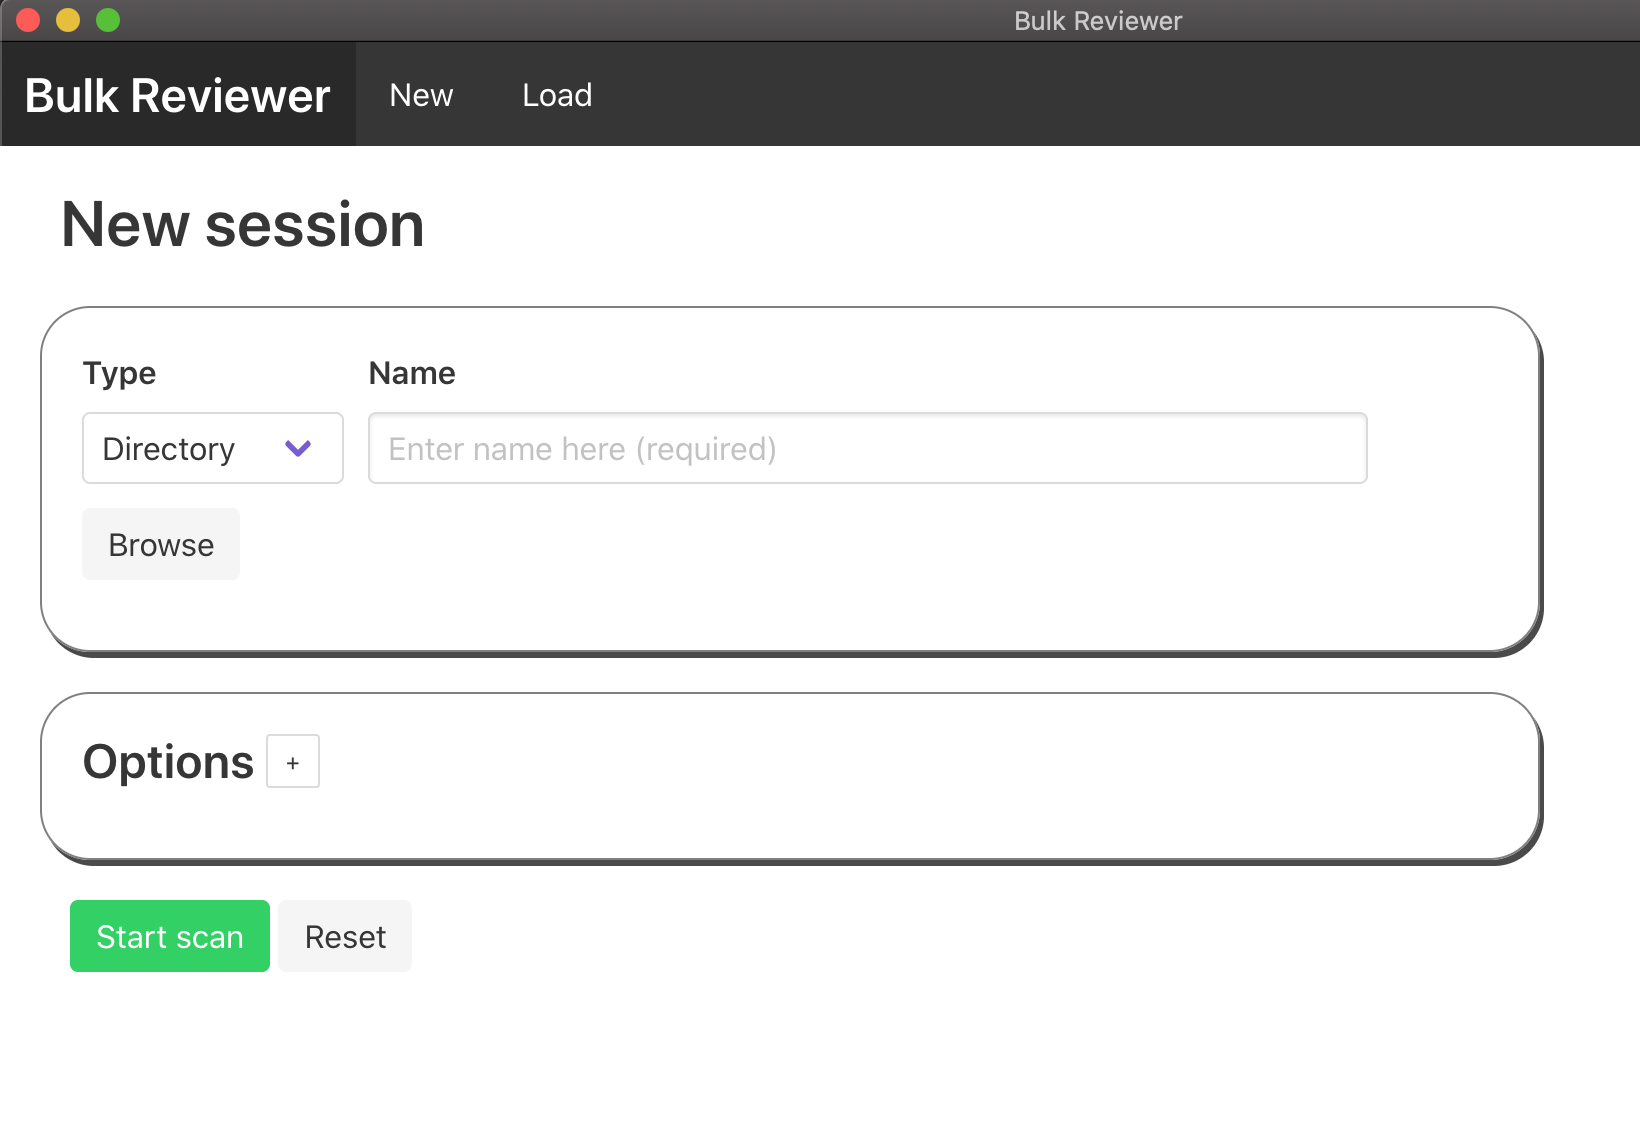 Image of Bulk Reviewer New session form